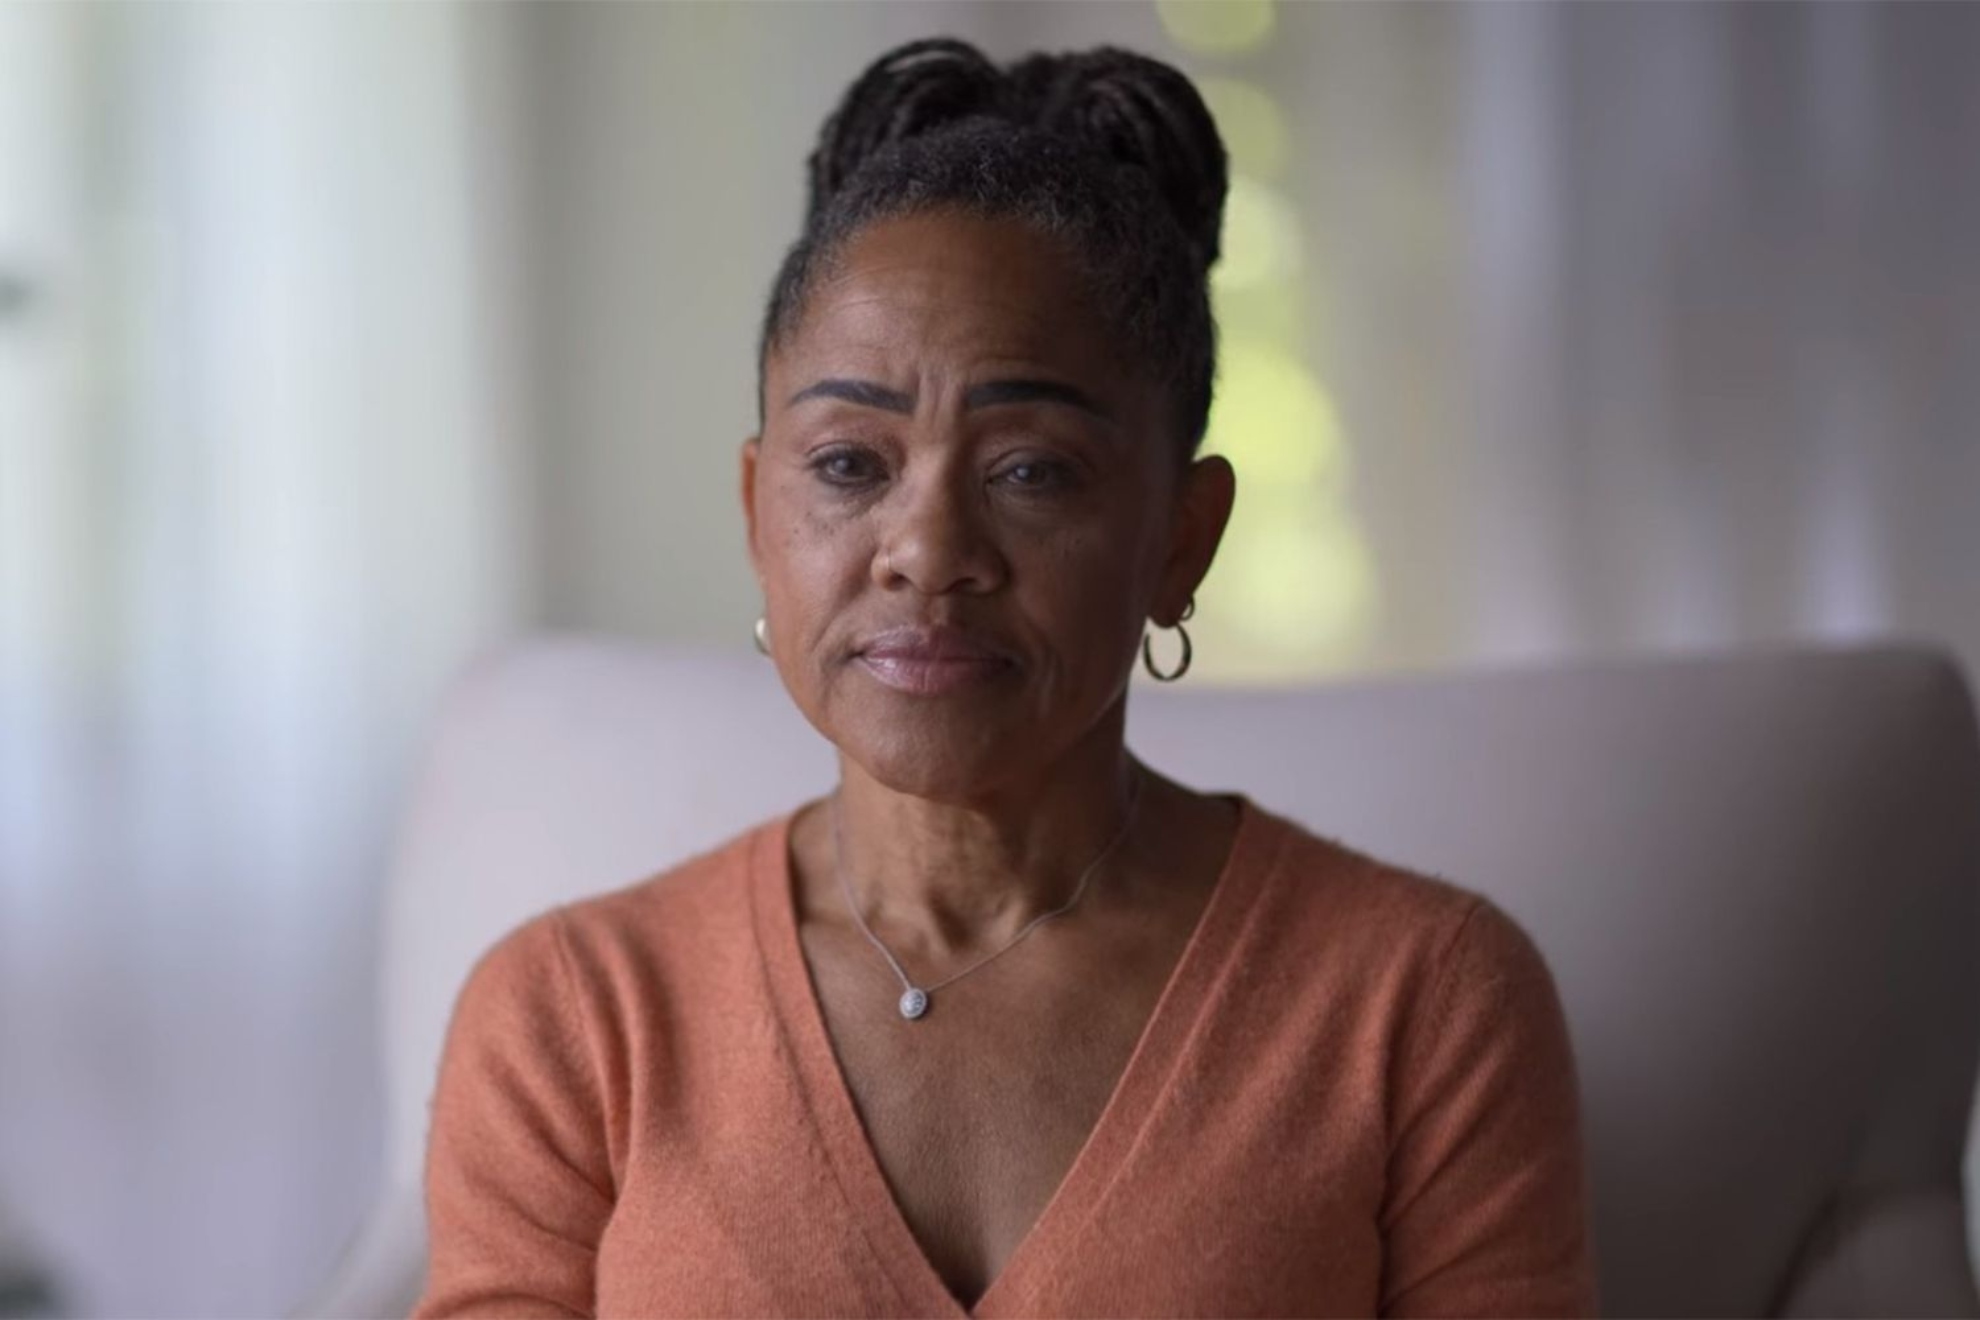 Doria Ragland, Meghan Markle's mother, once again expressed her unwavering support for her daughter. Speaking to a group of select journalists gathered at her residence, Ragland stated, "My beloved daughter, while she may be regarded as the intellectual powerhouse of the royal family and undoubtedly successful, she is not alone in her commitment to speaking truth to power." She emphasized, "It's time to cease the persecution against her."